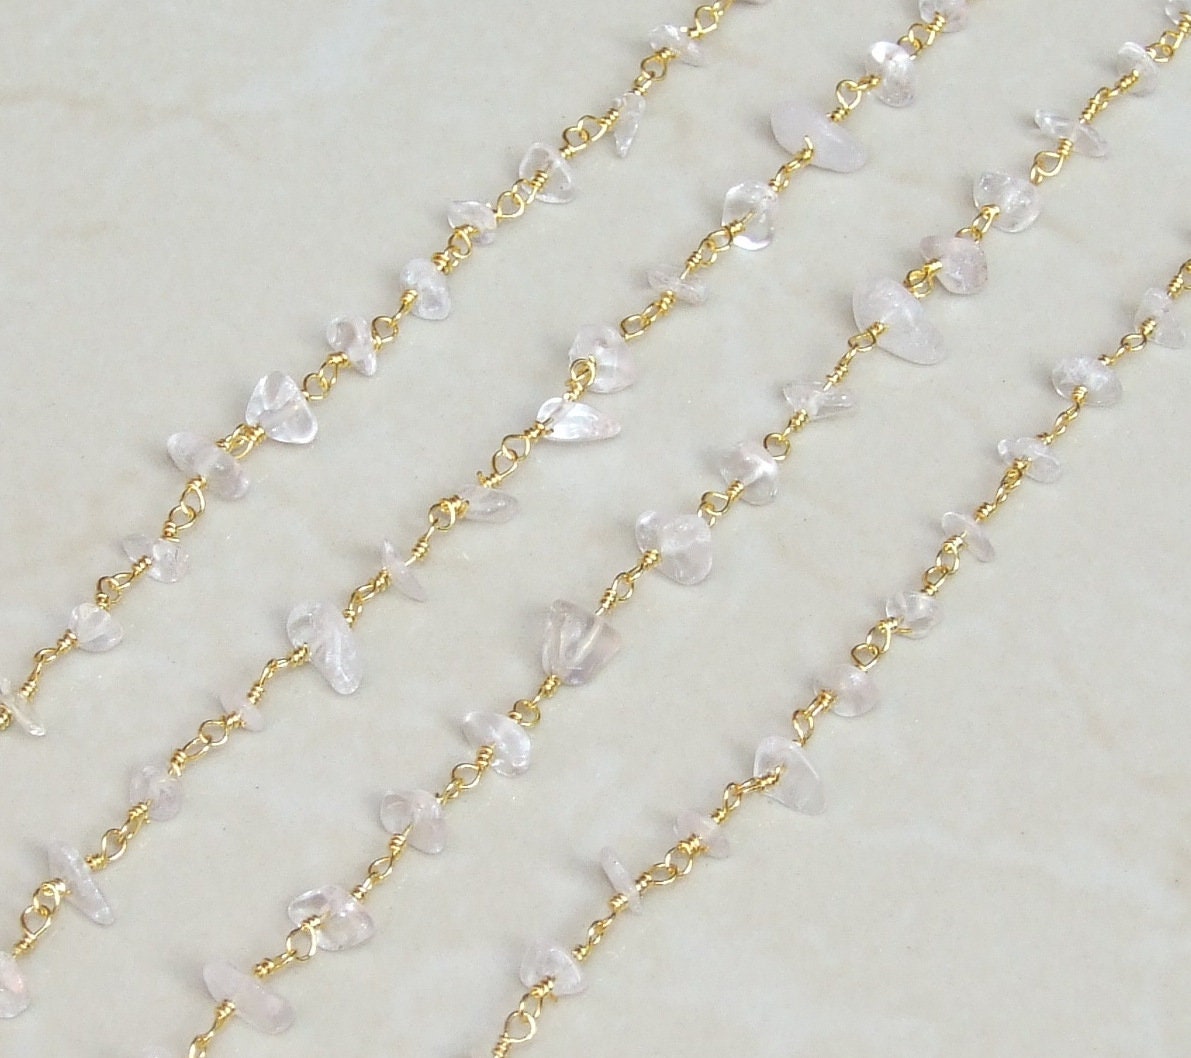 Clear Quartz Rosary Chain by the Foot, Rosary Chain with Beads, Rosary Chain Wholesale, Rosary Chain Bulk, Rosary Chain for Jewelry Making